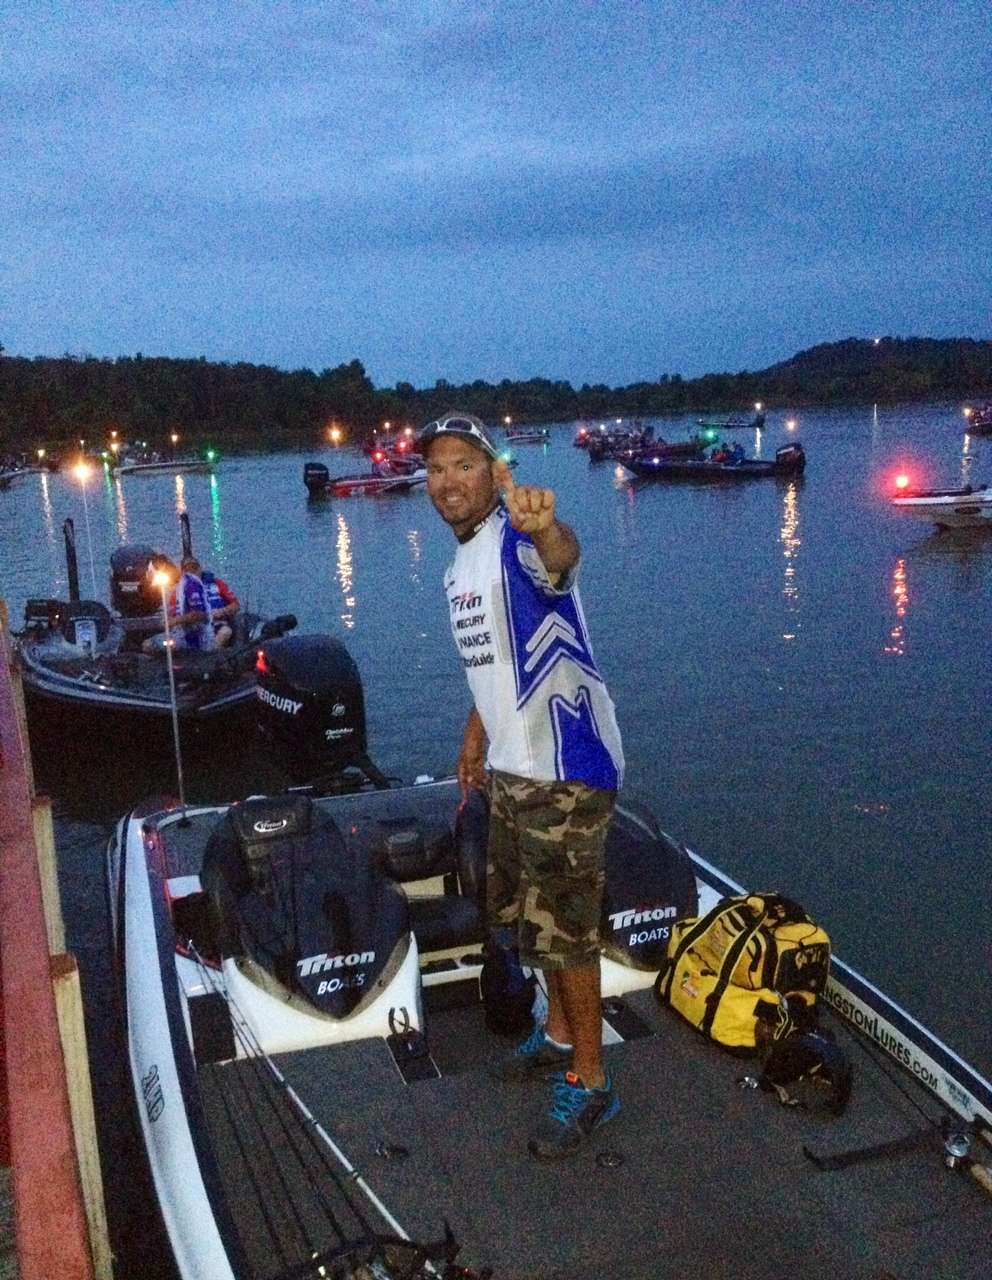 <p>Oklahoma angler and 2013 national championship contender Brandon Pedigo is all excited as he waits on his co angler for the day for his chance to "go and knock their lights out" as he puts it on the 3rd and final day of the Central Divisional at Lake Eufaula.</p>
